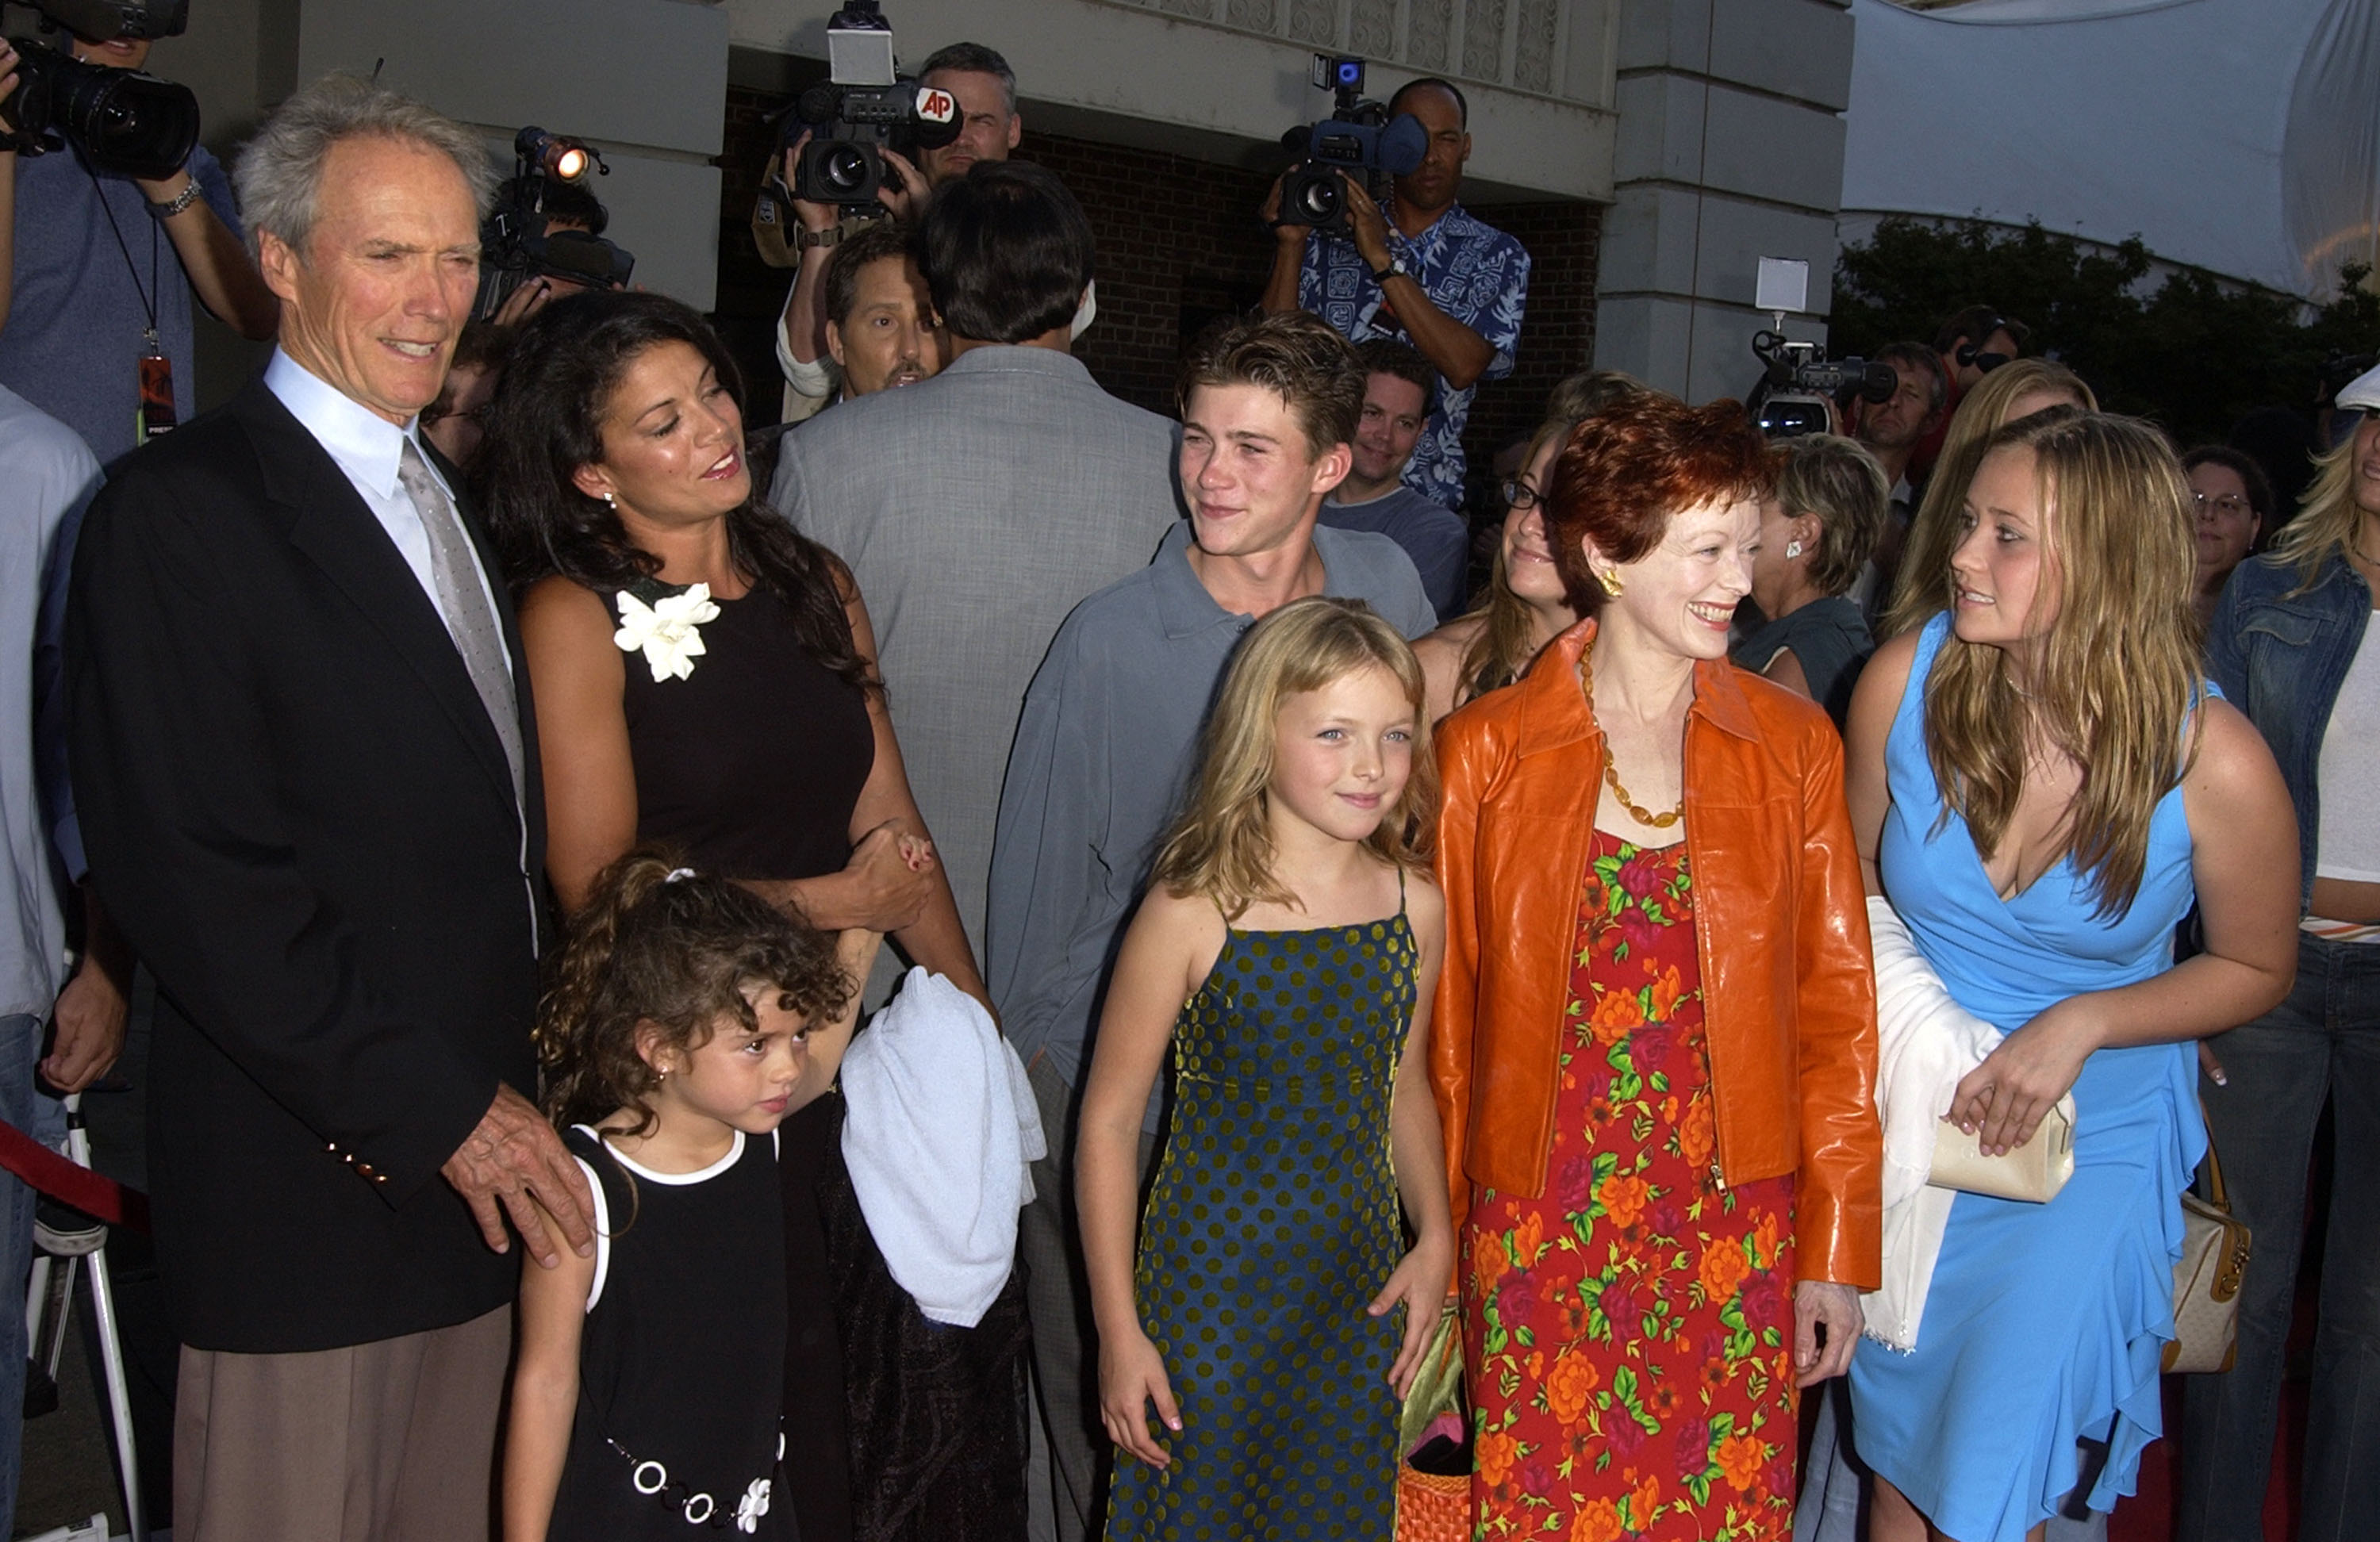 Clint Eastwood, his now ex-wife Dina, his ex-girlfriend, Frances Fisher, and his children Scott, Kathryn, Francesca, and Morgan photographed at a Hollywood event in 2002